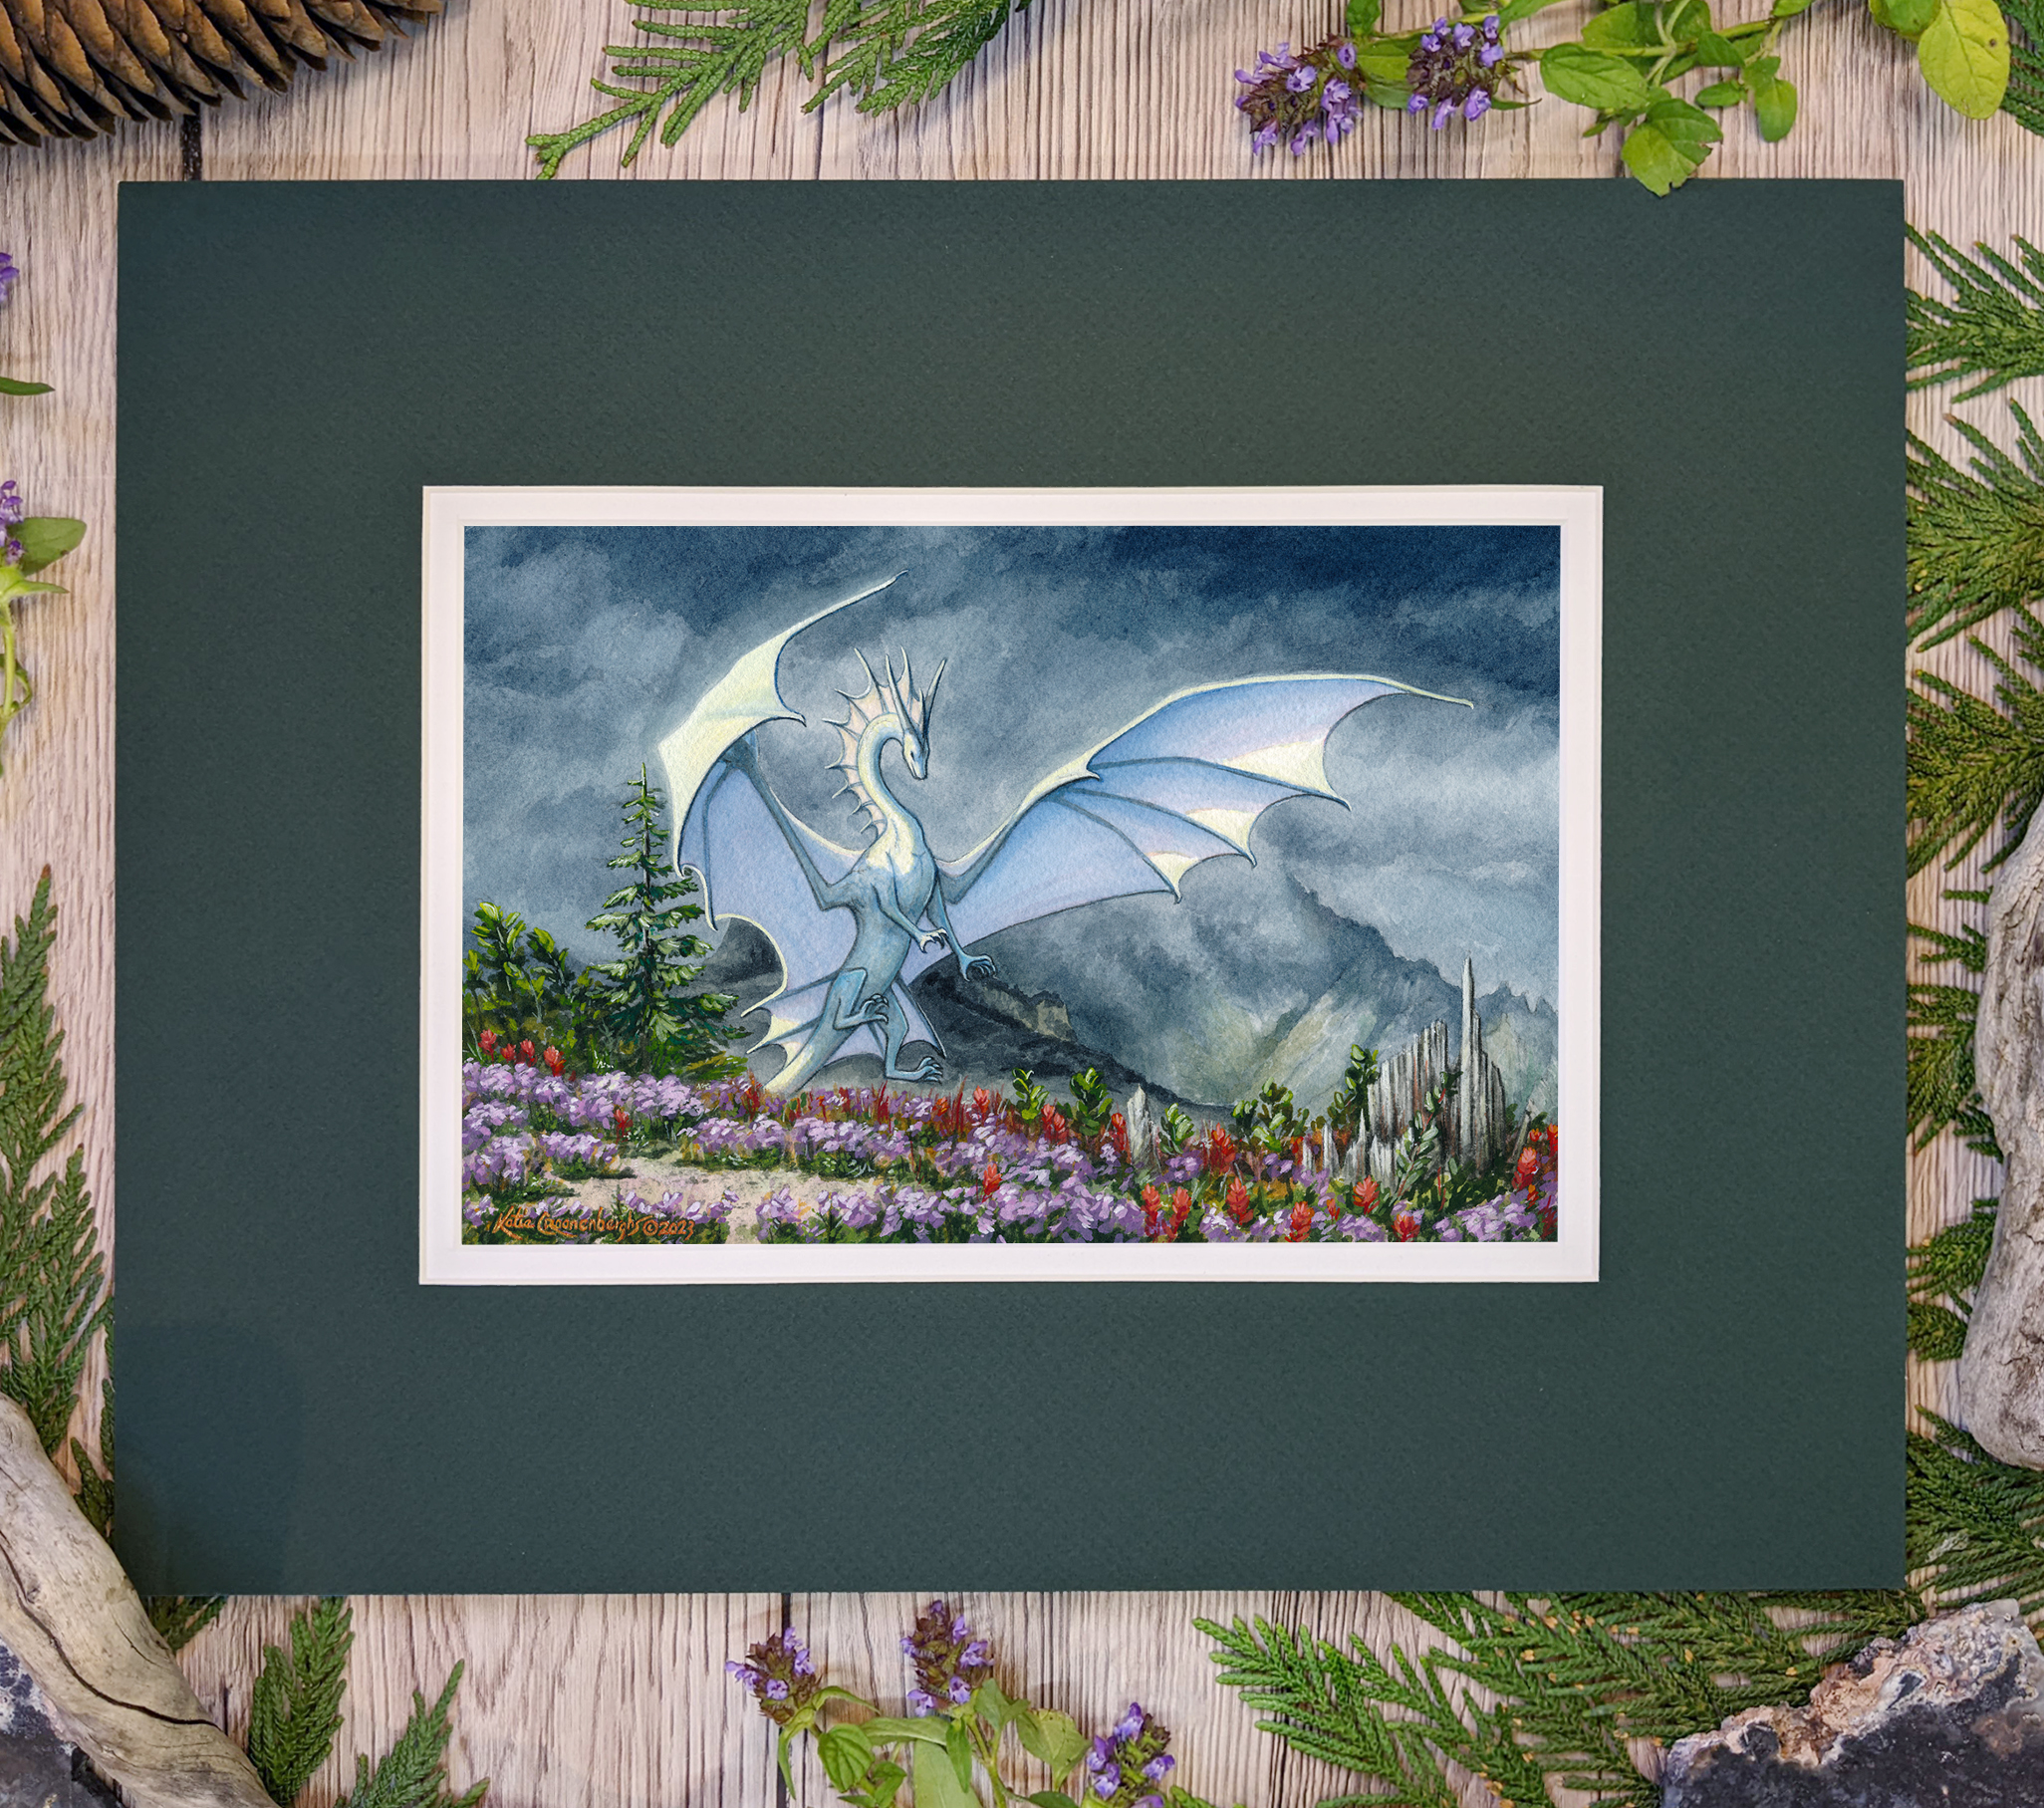 Photo of the artwork with mat. The bottom mat is white, the top main mat is a deep muted forest green. There are plants and leaves laid around the artwork on a table. The artwork is a white dragon alighting on a hilltop covered in purple and red flowers. The sky is dark and rainy, some sunlight reaches the mountain in the background. The dragon is white, the sun pierces the clouds to light it as it spreads its wings to land in the flowers.